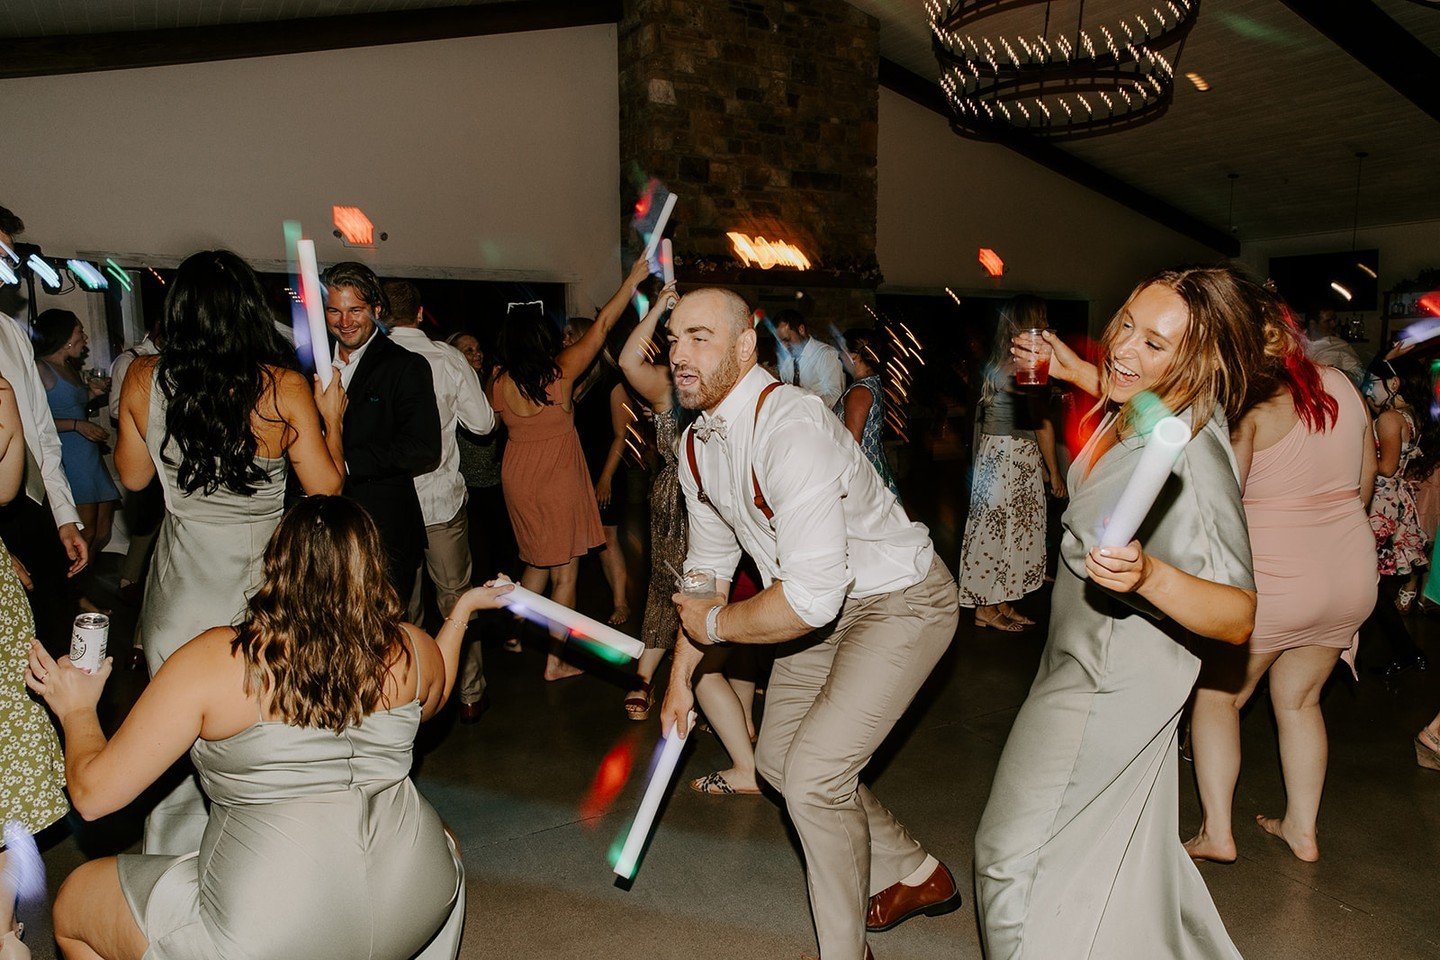 🎸 Let's get the party started! What's your must-have upbeat song for the wedding reception? 🕺🎉 
Photo Credit: @michaelapaige_photography
Venue: @blacksheepweddingsgb
#WeddingParty #DanceFloorAnthem  #WIWeddingTunes #WisconsinWeddingMusic #MusicTip